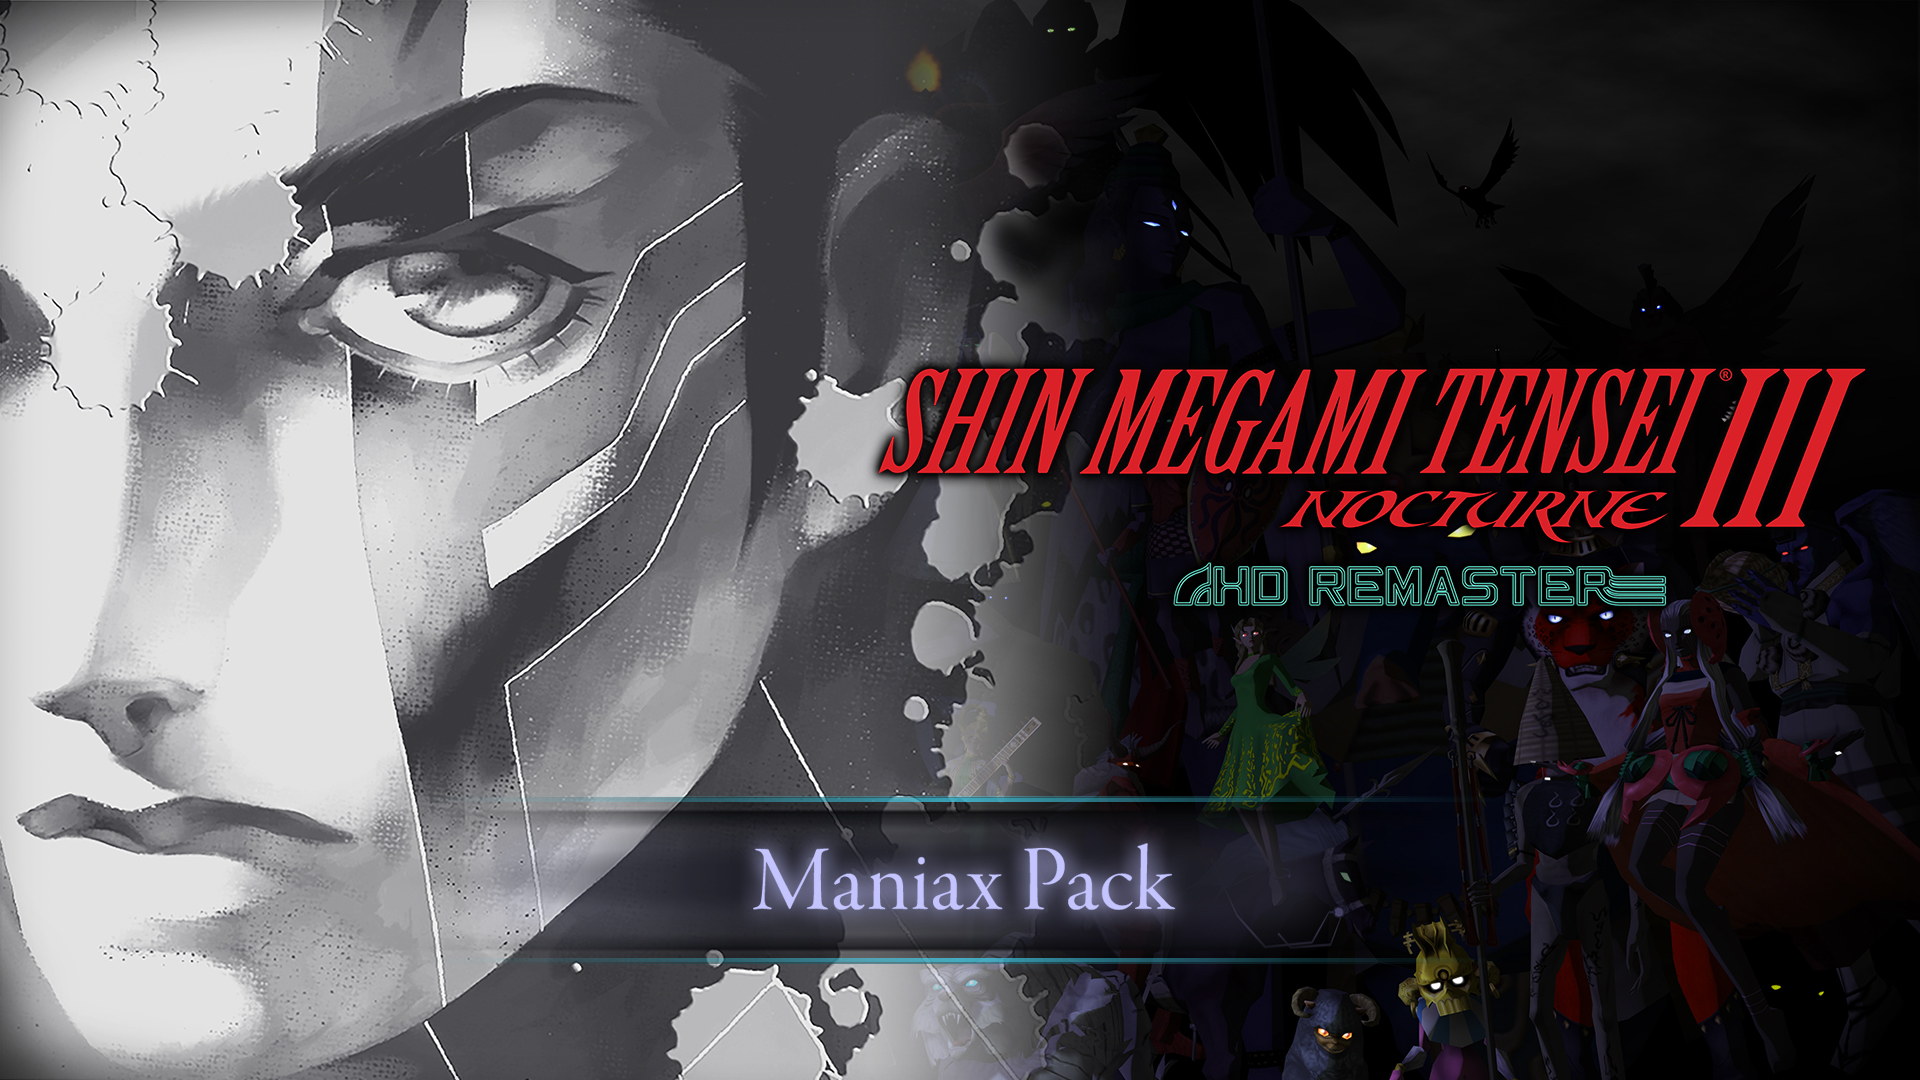 Maniax Pack